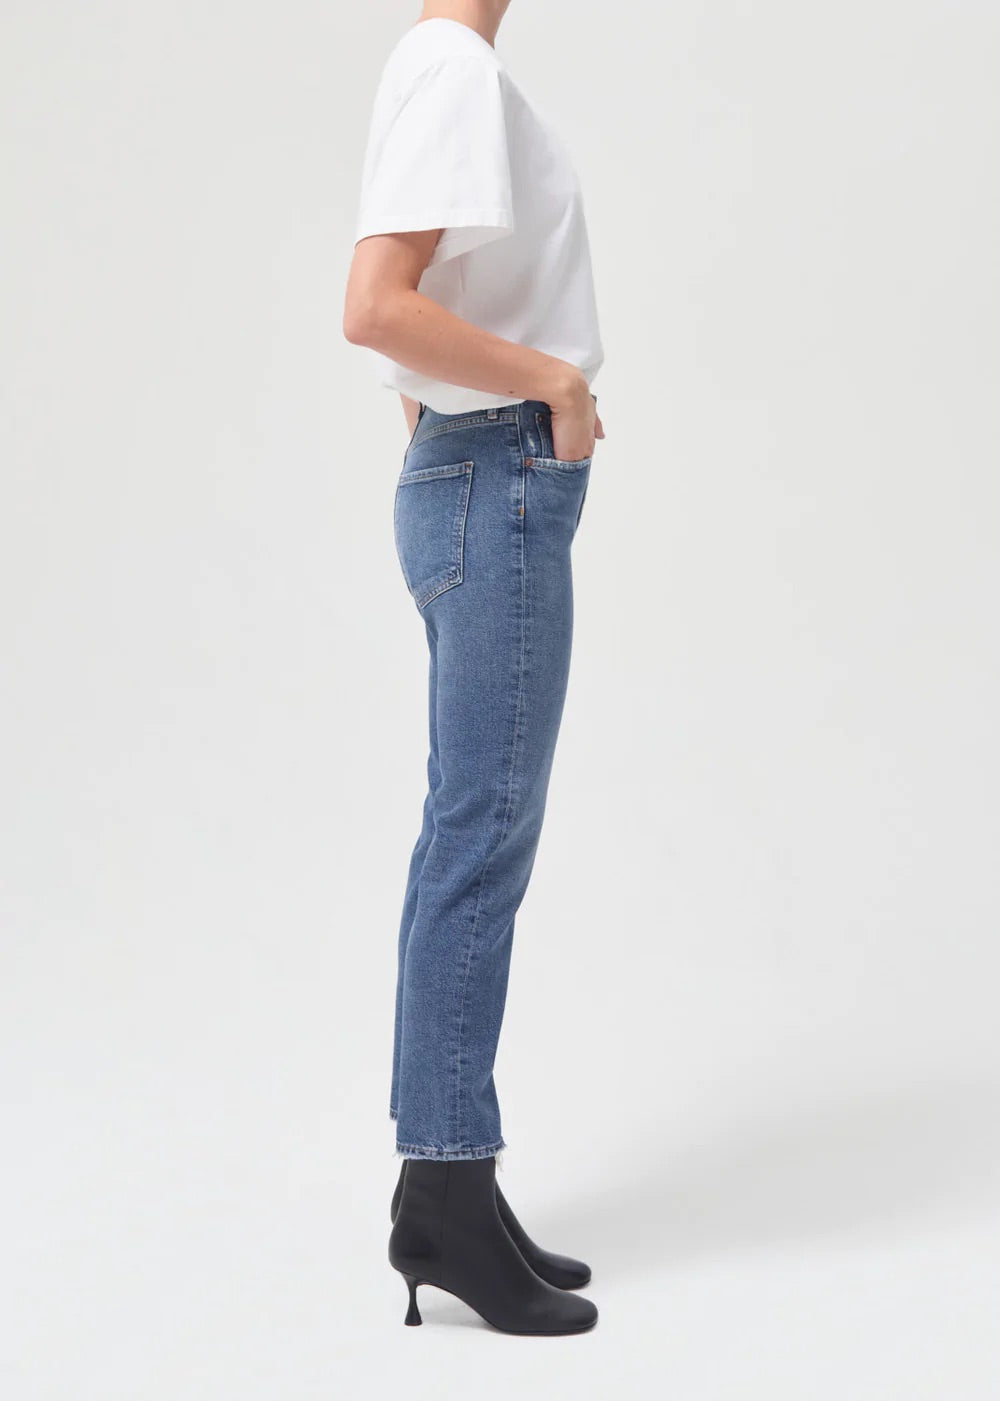 The back view of a woman wearing AGOLDE's Riley Straight Crop - Silence denim jeans and a white t-shirt.